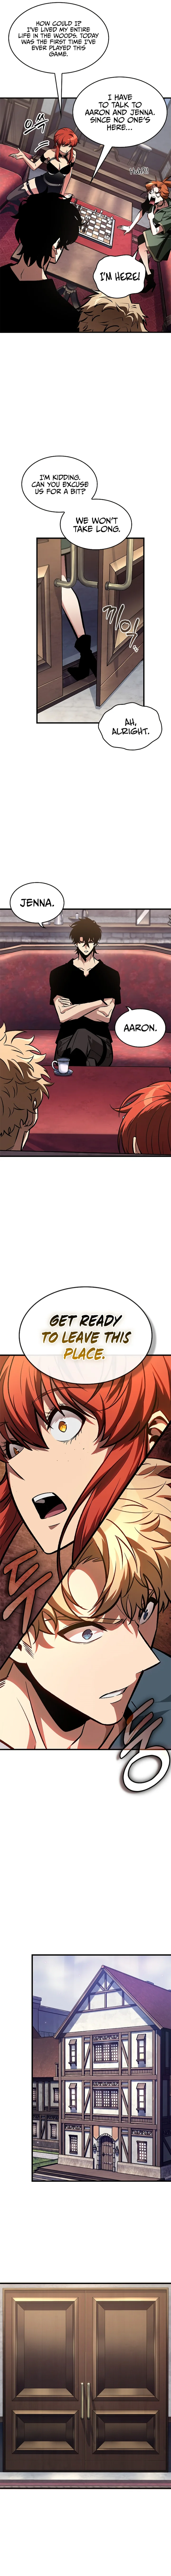 Pick Me Up - Chapter 79 Page 4